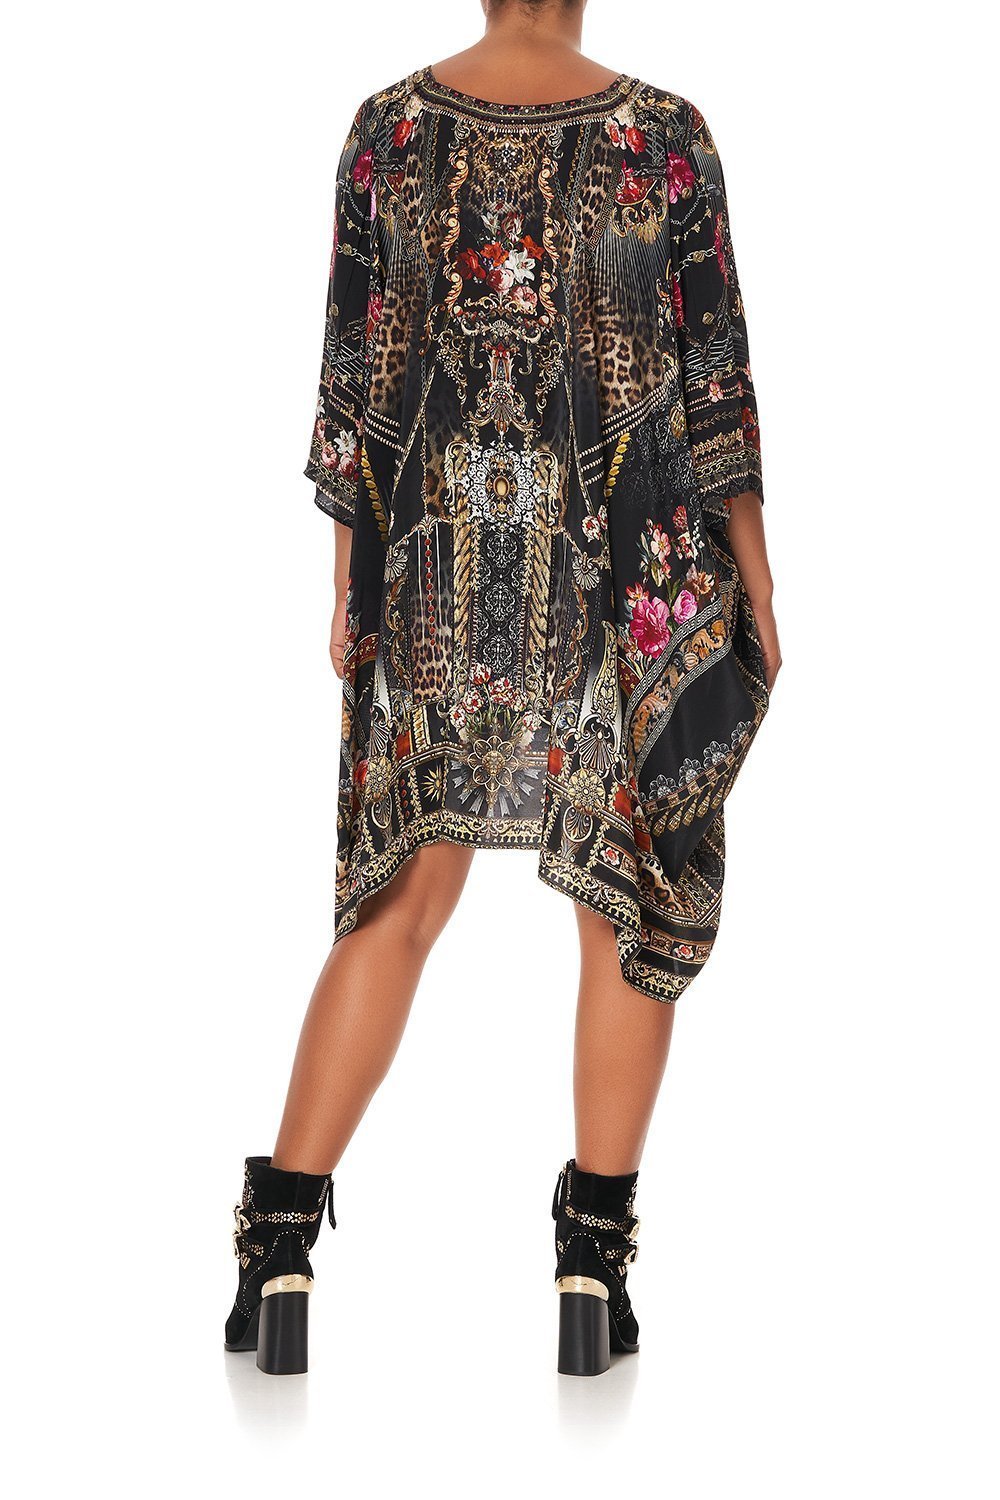 KAFTAN WITH BUTTON UP SLEEVES GOTHIC GODDESS